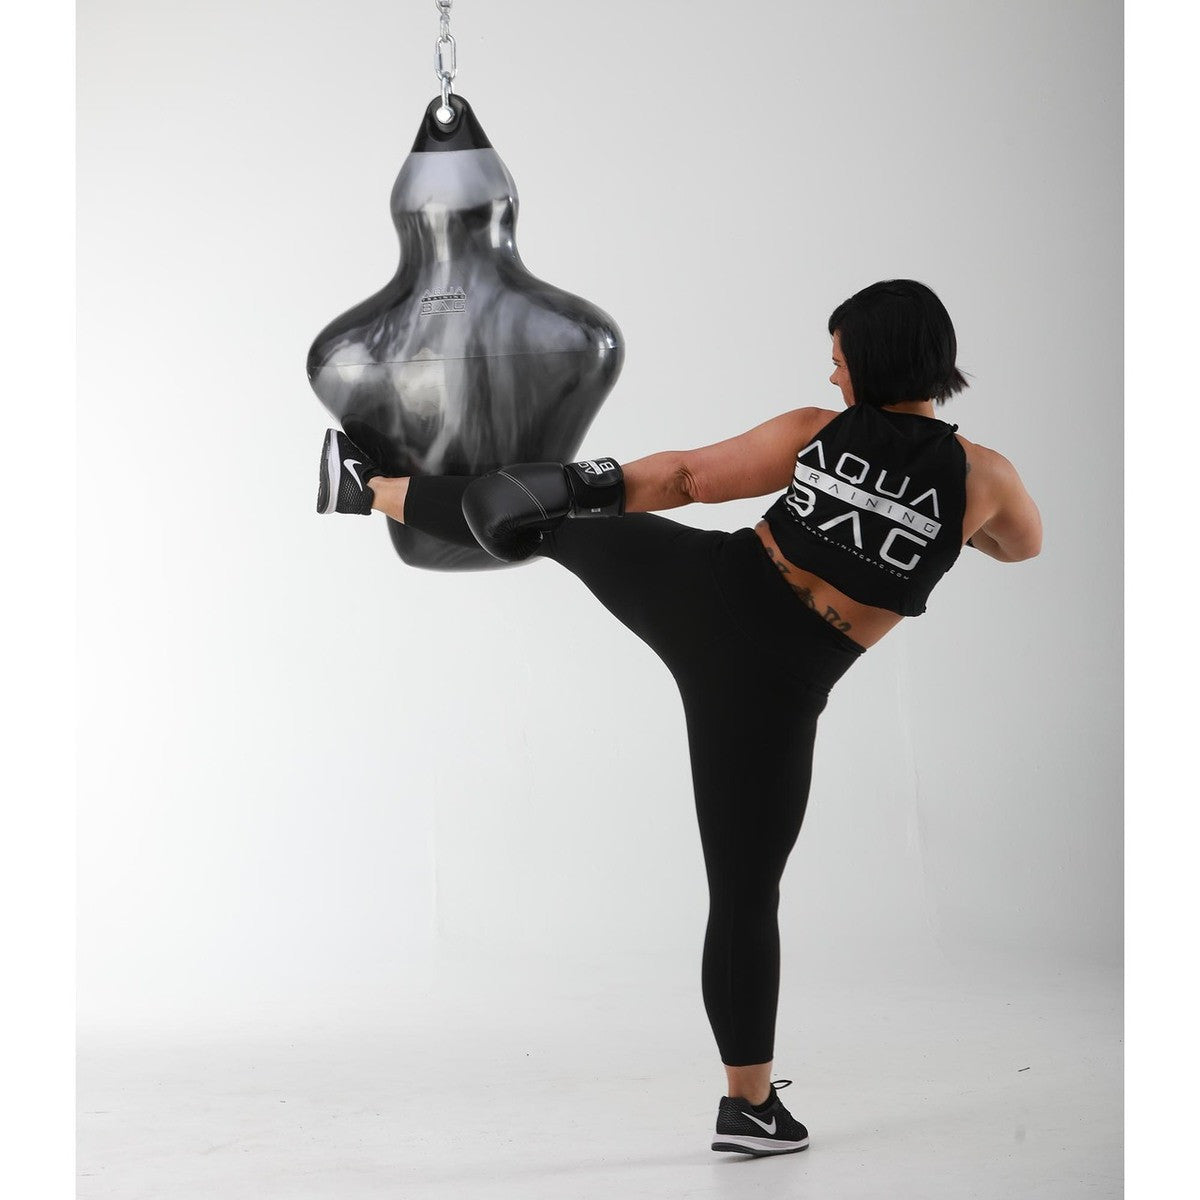 30L Water Punching Bag | Australia's DIY, Renovation, Home and Lifestyle  Store